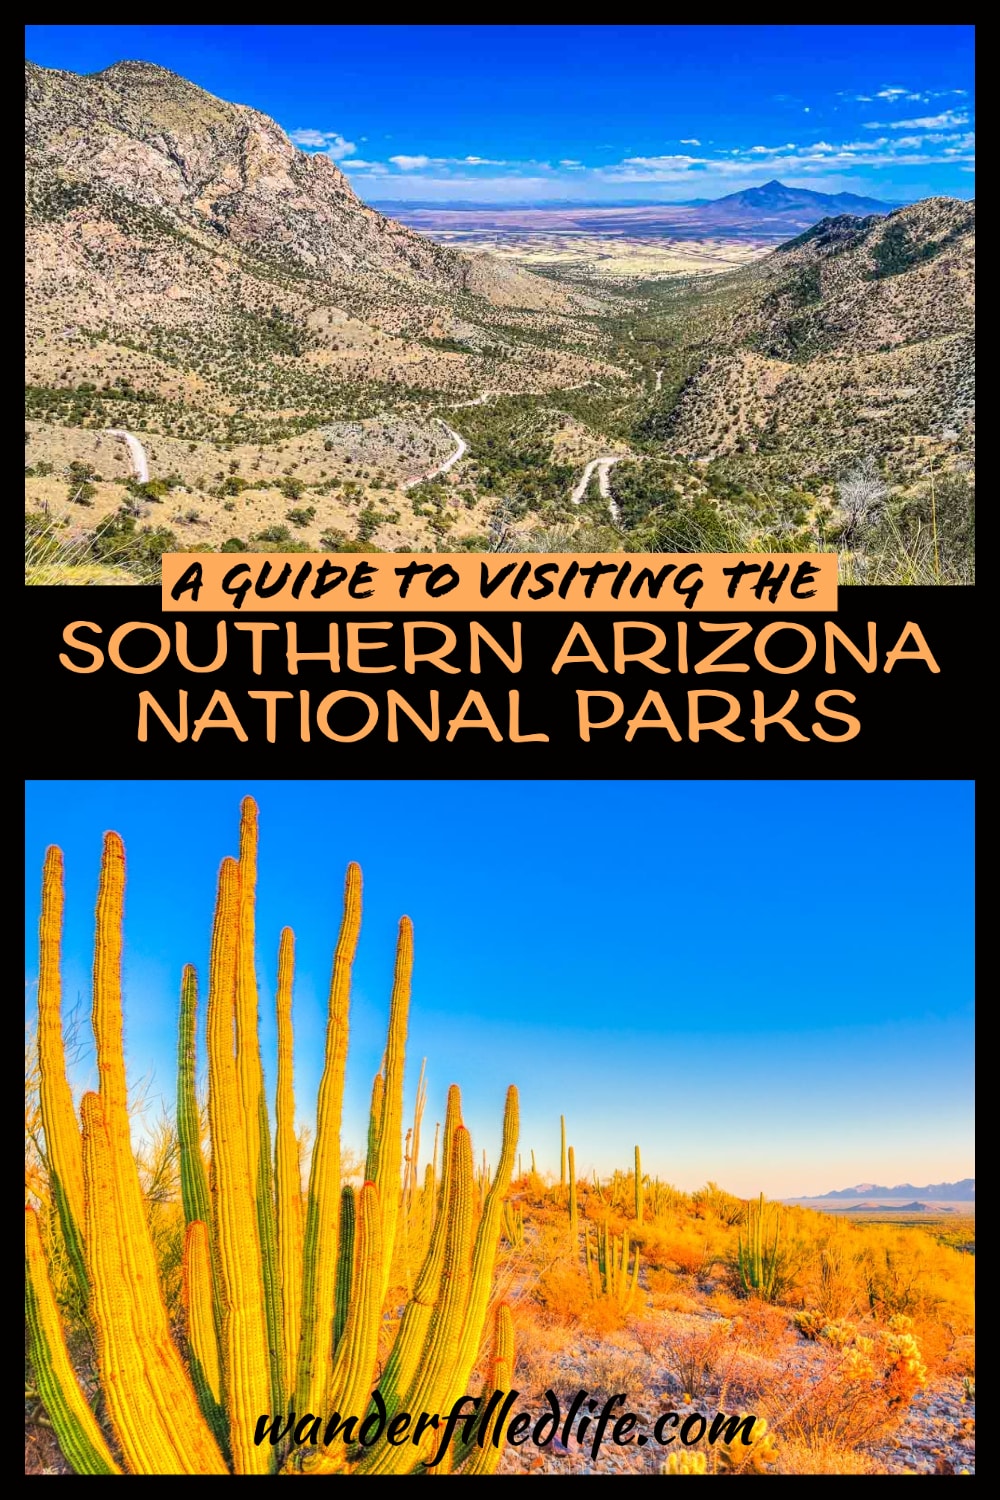 Southern Arizona national parks are a bevy of natural beauty, cultural treasures and surprising biological diversity, well worth a visit.